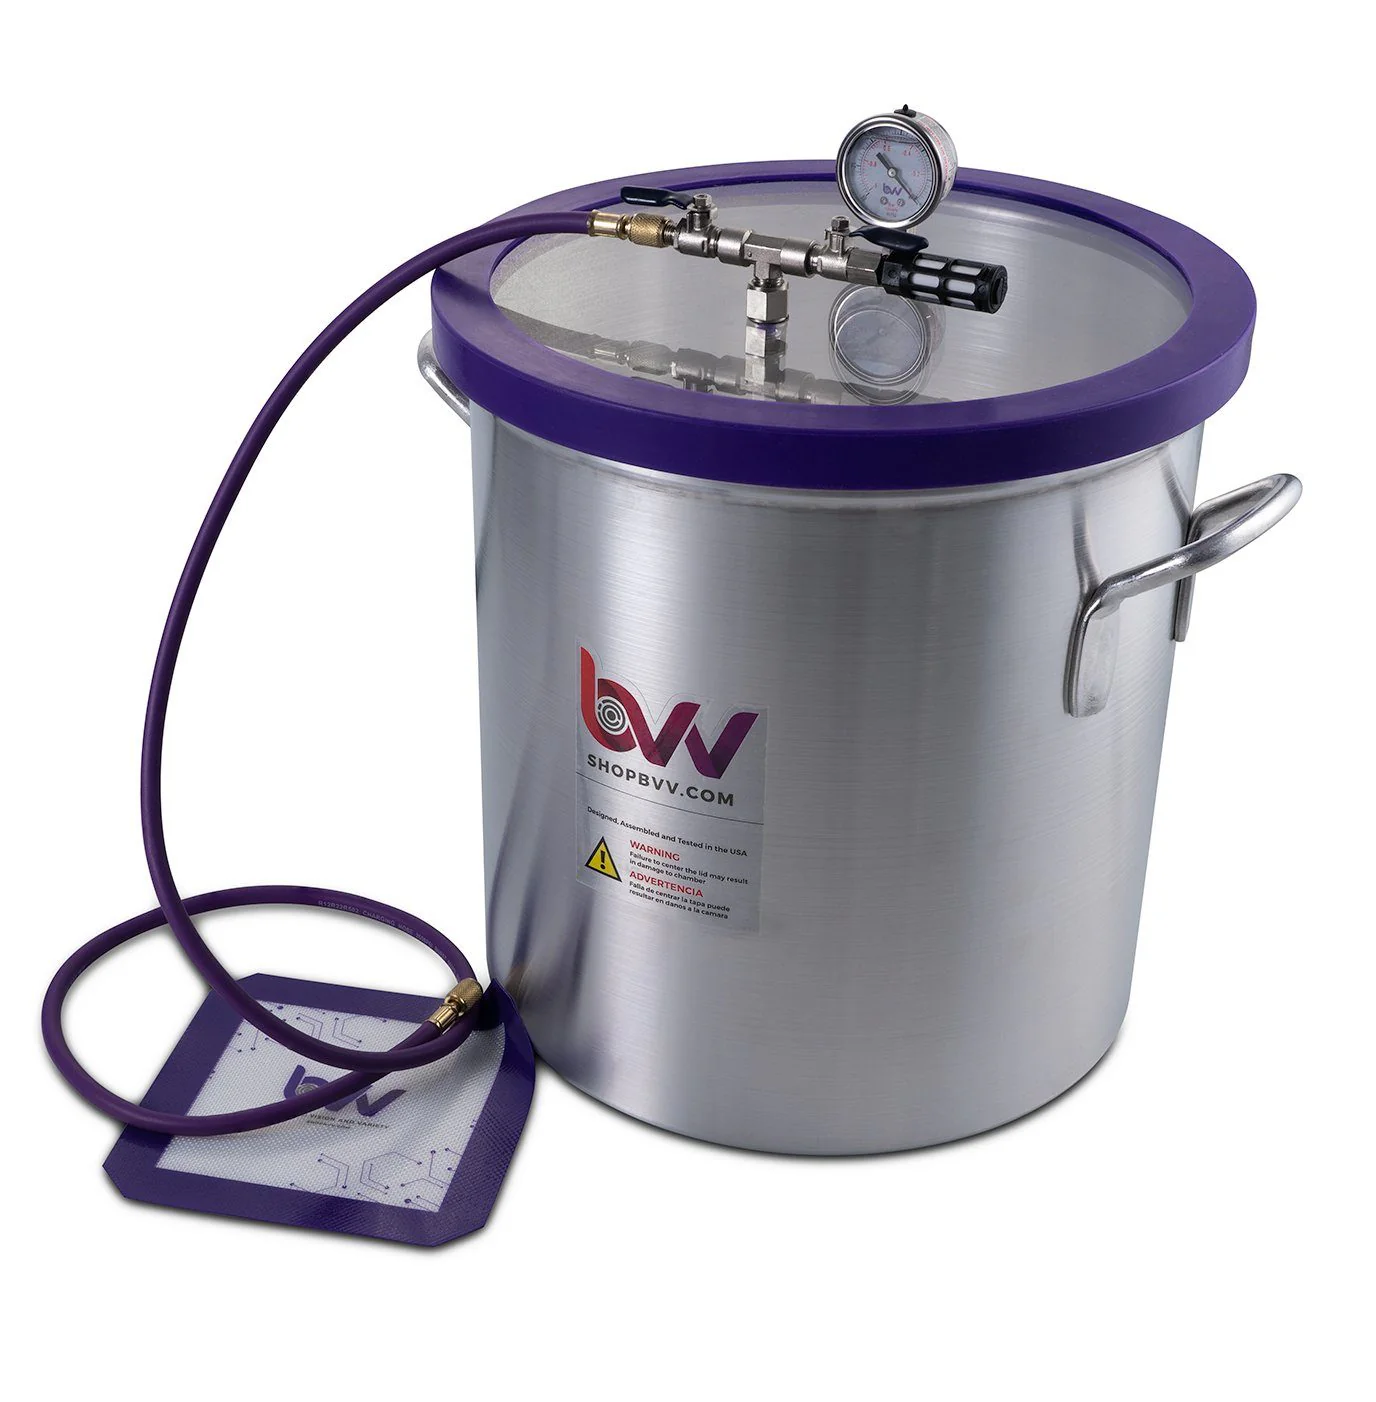 Can you fit a standard 5 gallon bucket (without a lid) into this unit?